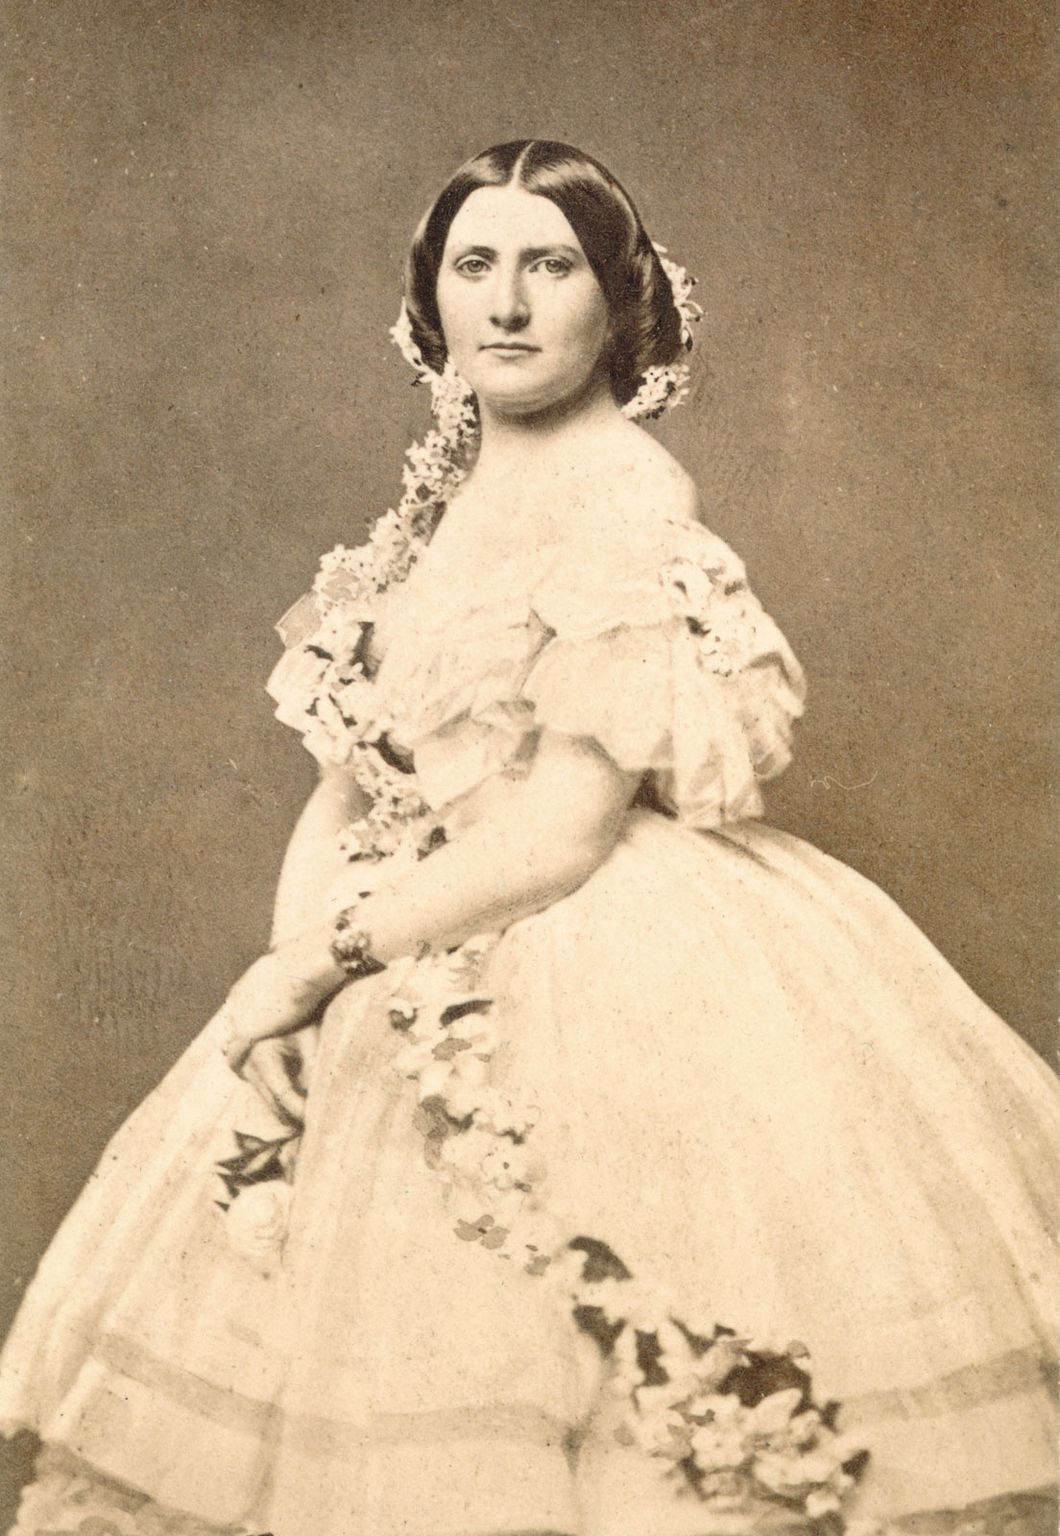 Harriet Lane Was The Unmarried First Lady Loved By The Royal Family